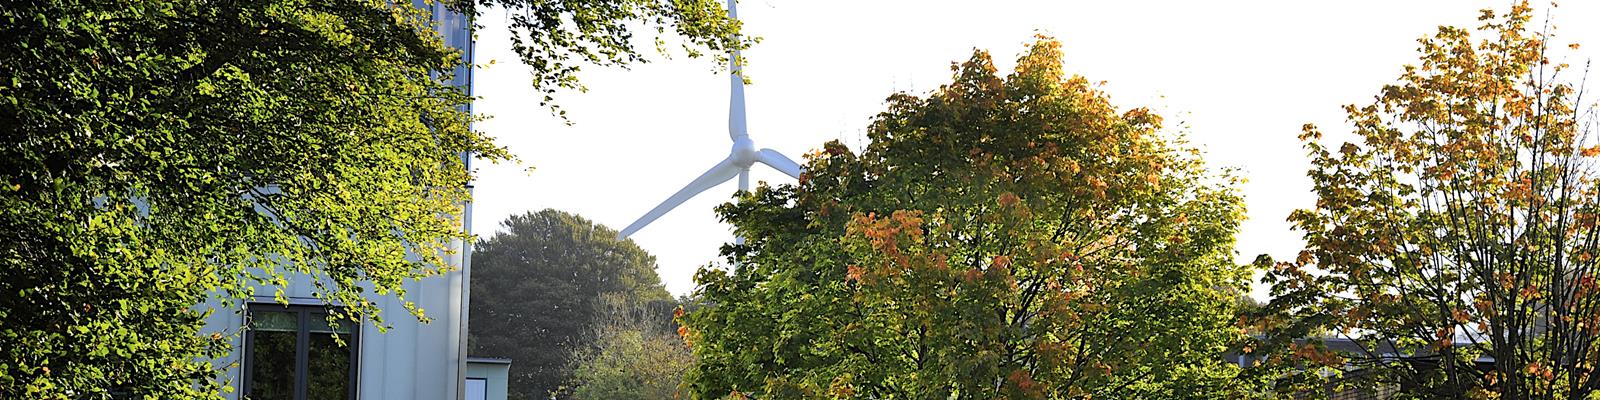 The Lancaster University wind turbine viewed through the trees on campus